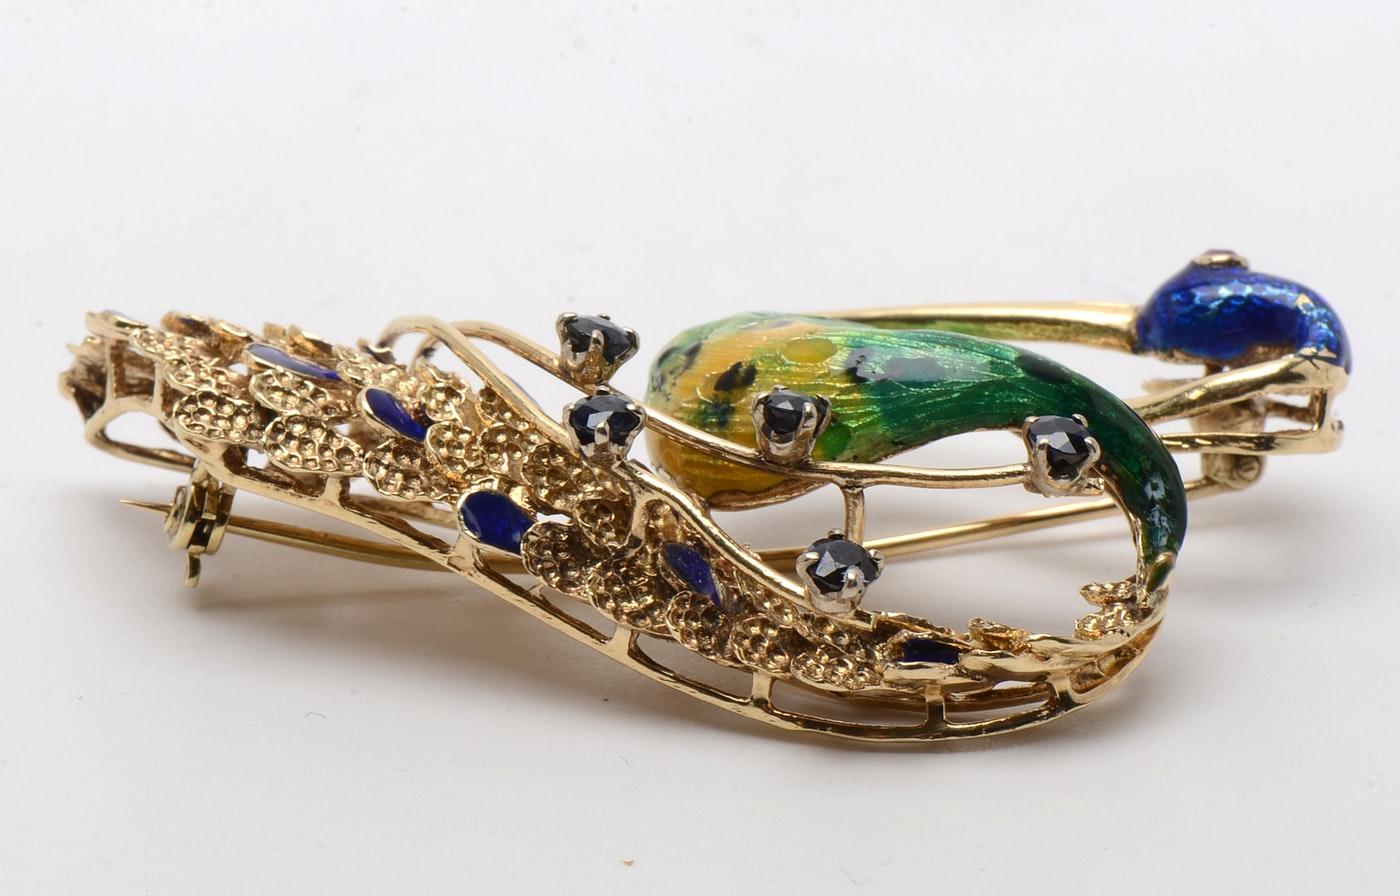 Ornate Retro Enamel Peacock Bird Brooch Ruby and Sapphire Accents, circa 1970s 4